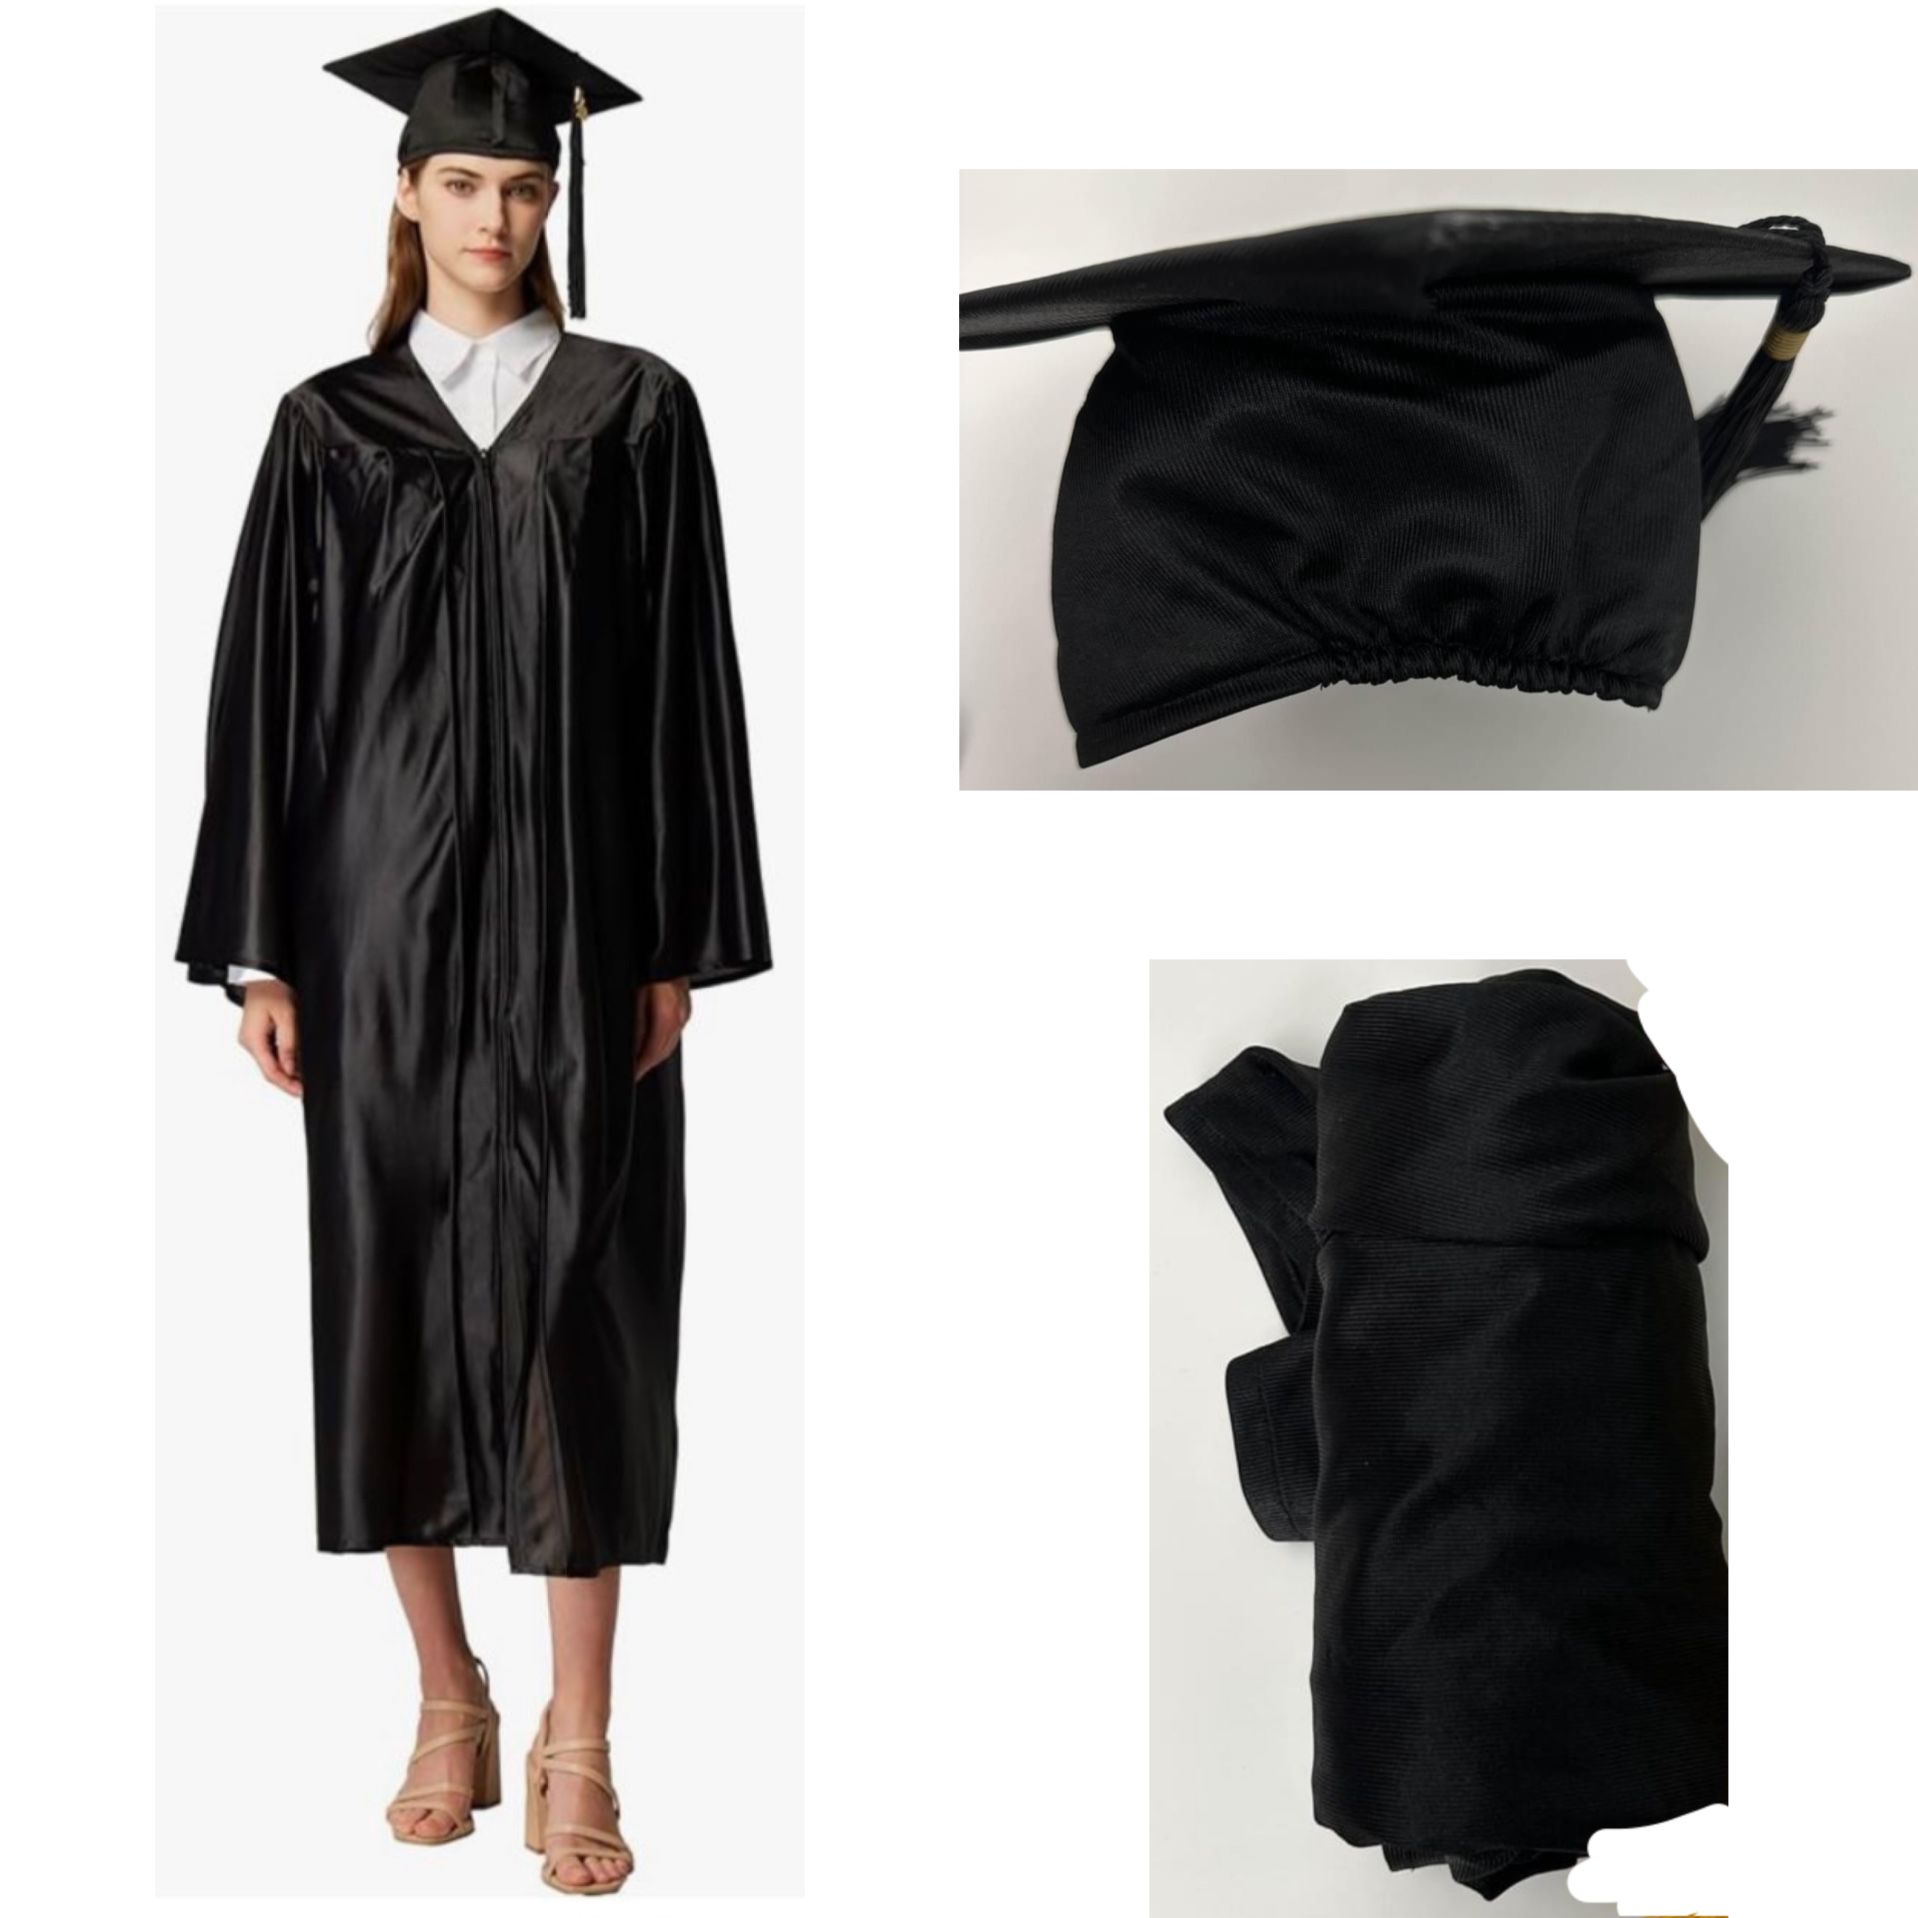 Black Cap and Gown (doesn’t say graduating year)